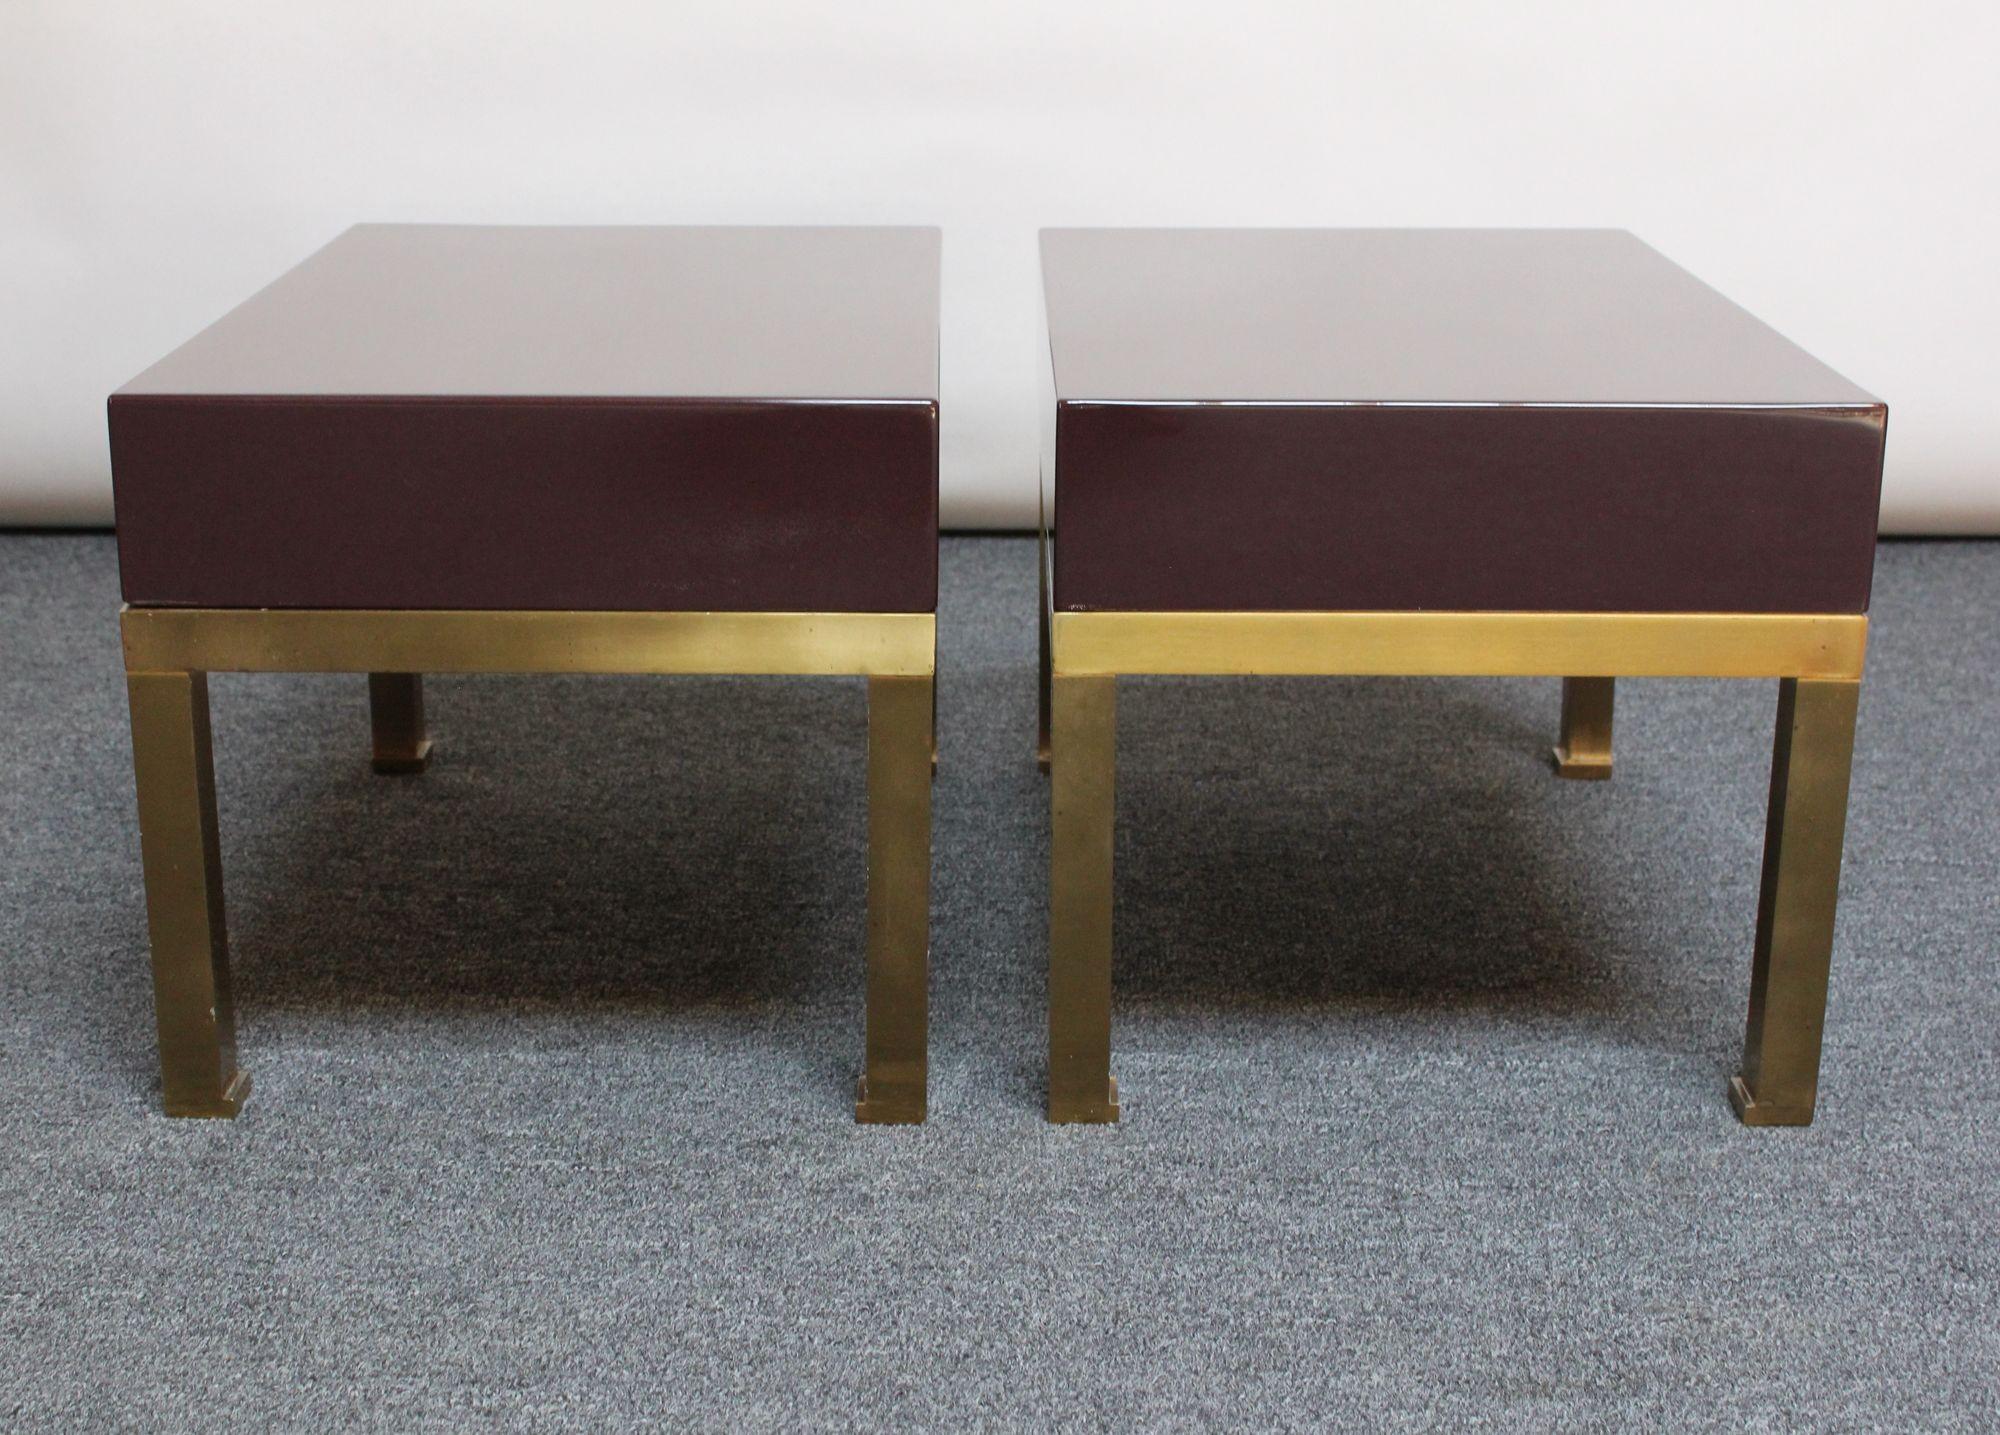 Pair of French Moderne Lacquered Mahogany and Brass Nightstands by Guy Lefèvre For Sale 4